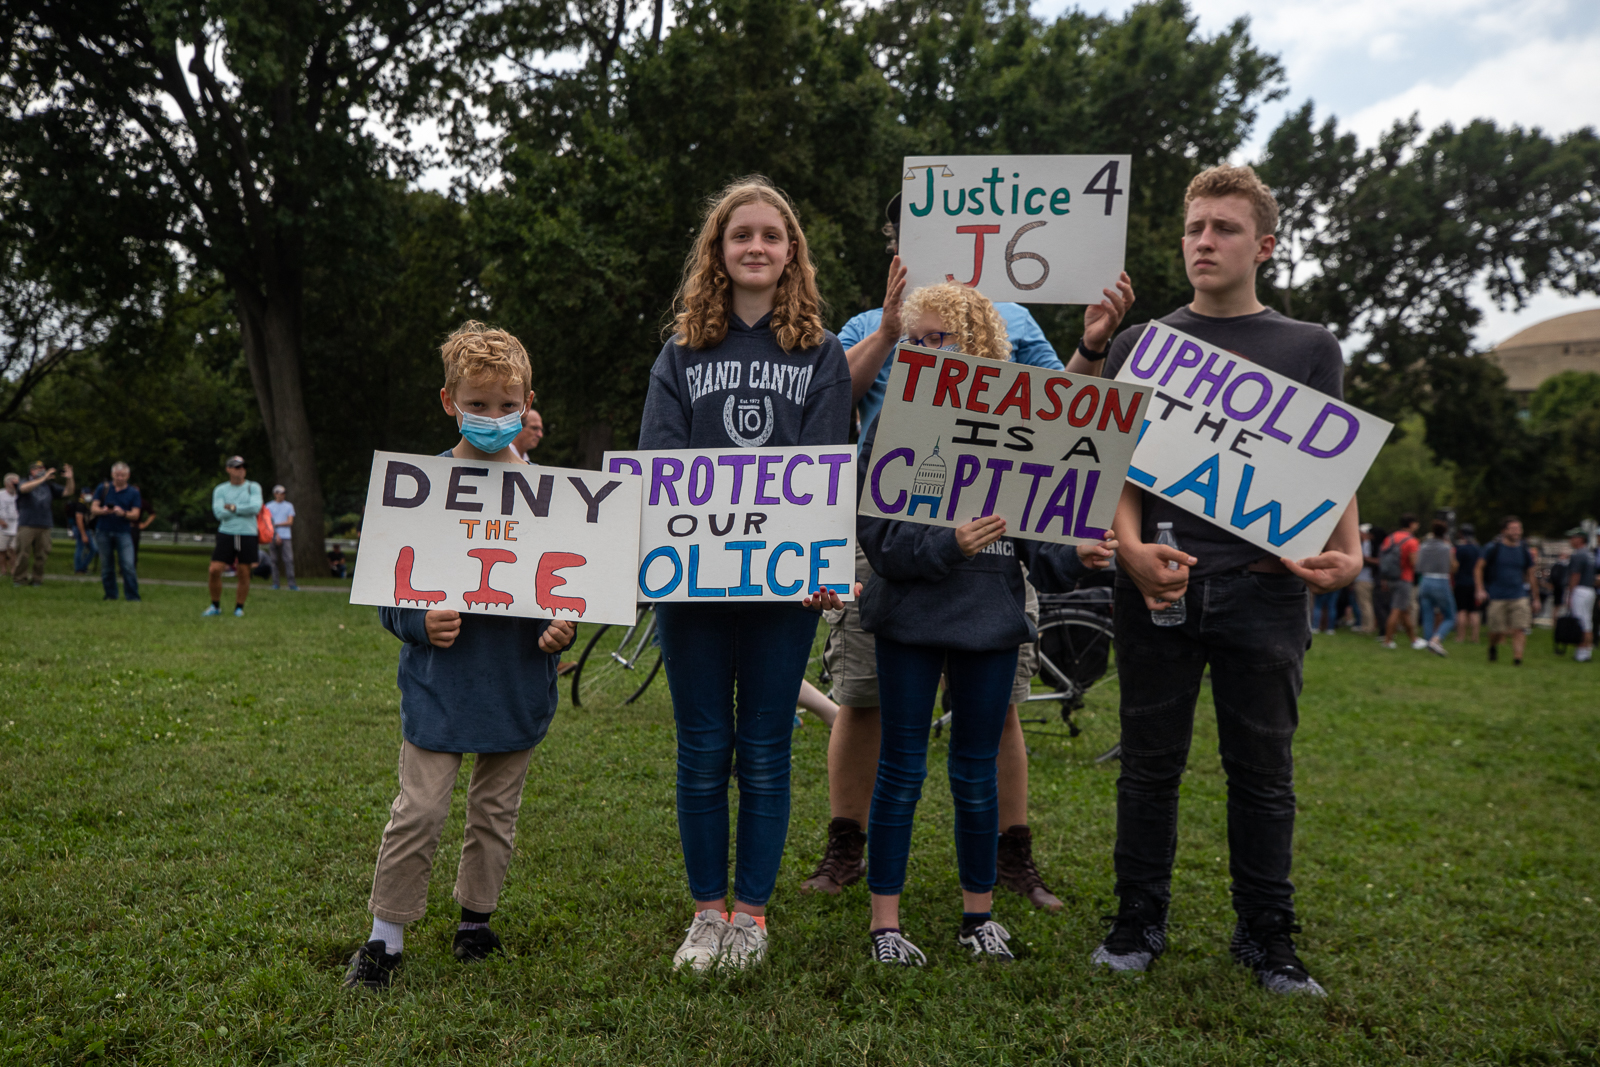 Several people carried American flags and signs in support of people jailed in connection with the Capitol riot at the “Justice for J6” rally in Washington, D.C. on September 18, 2021. (Kaylee Greenlee – Daily Caller News Foundation)